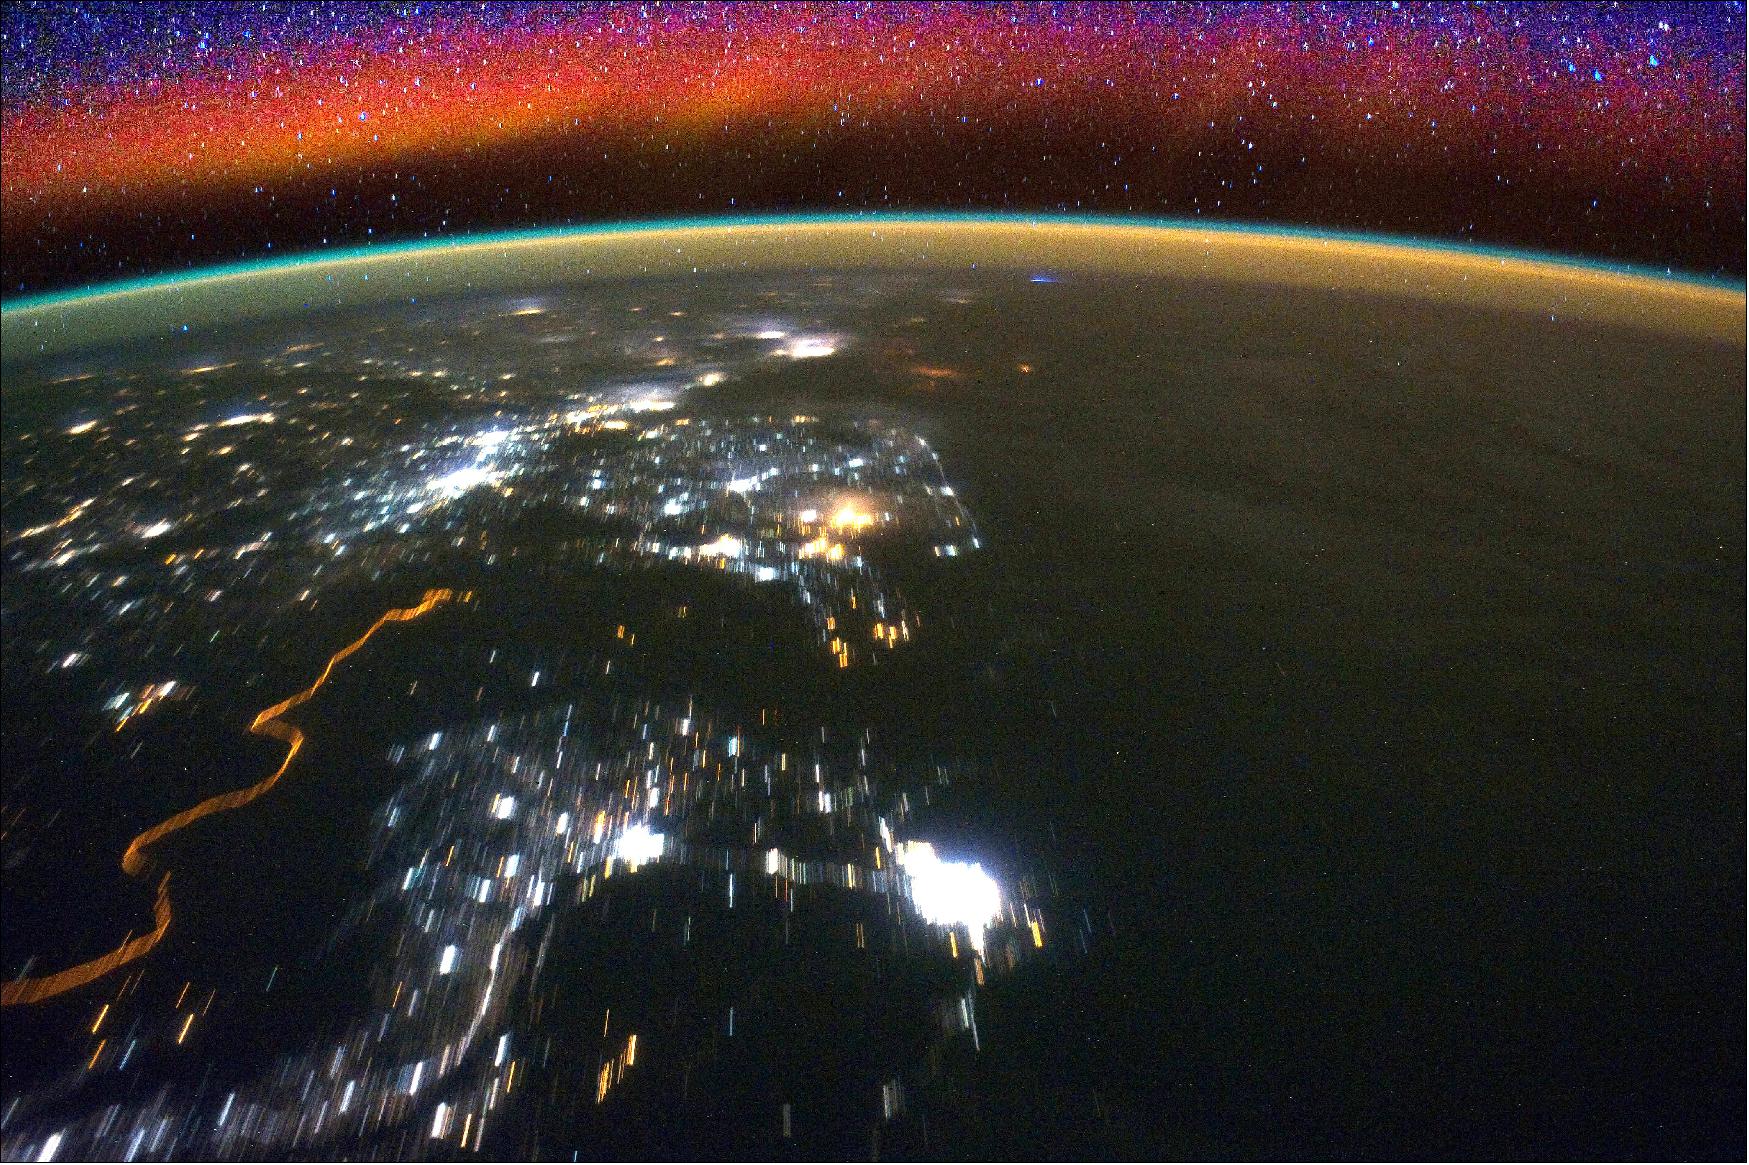 Figure 15: Processes in Earth’s upper atmosphere create bright swaths of color known as airglow, as seen here in an image taken from the International Space Station (image credit: NASA)